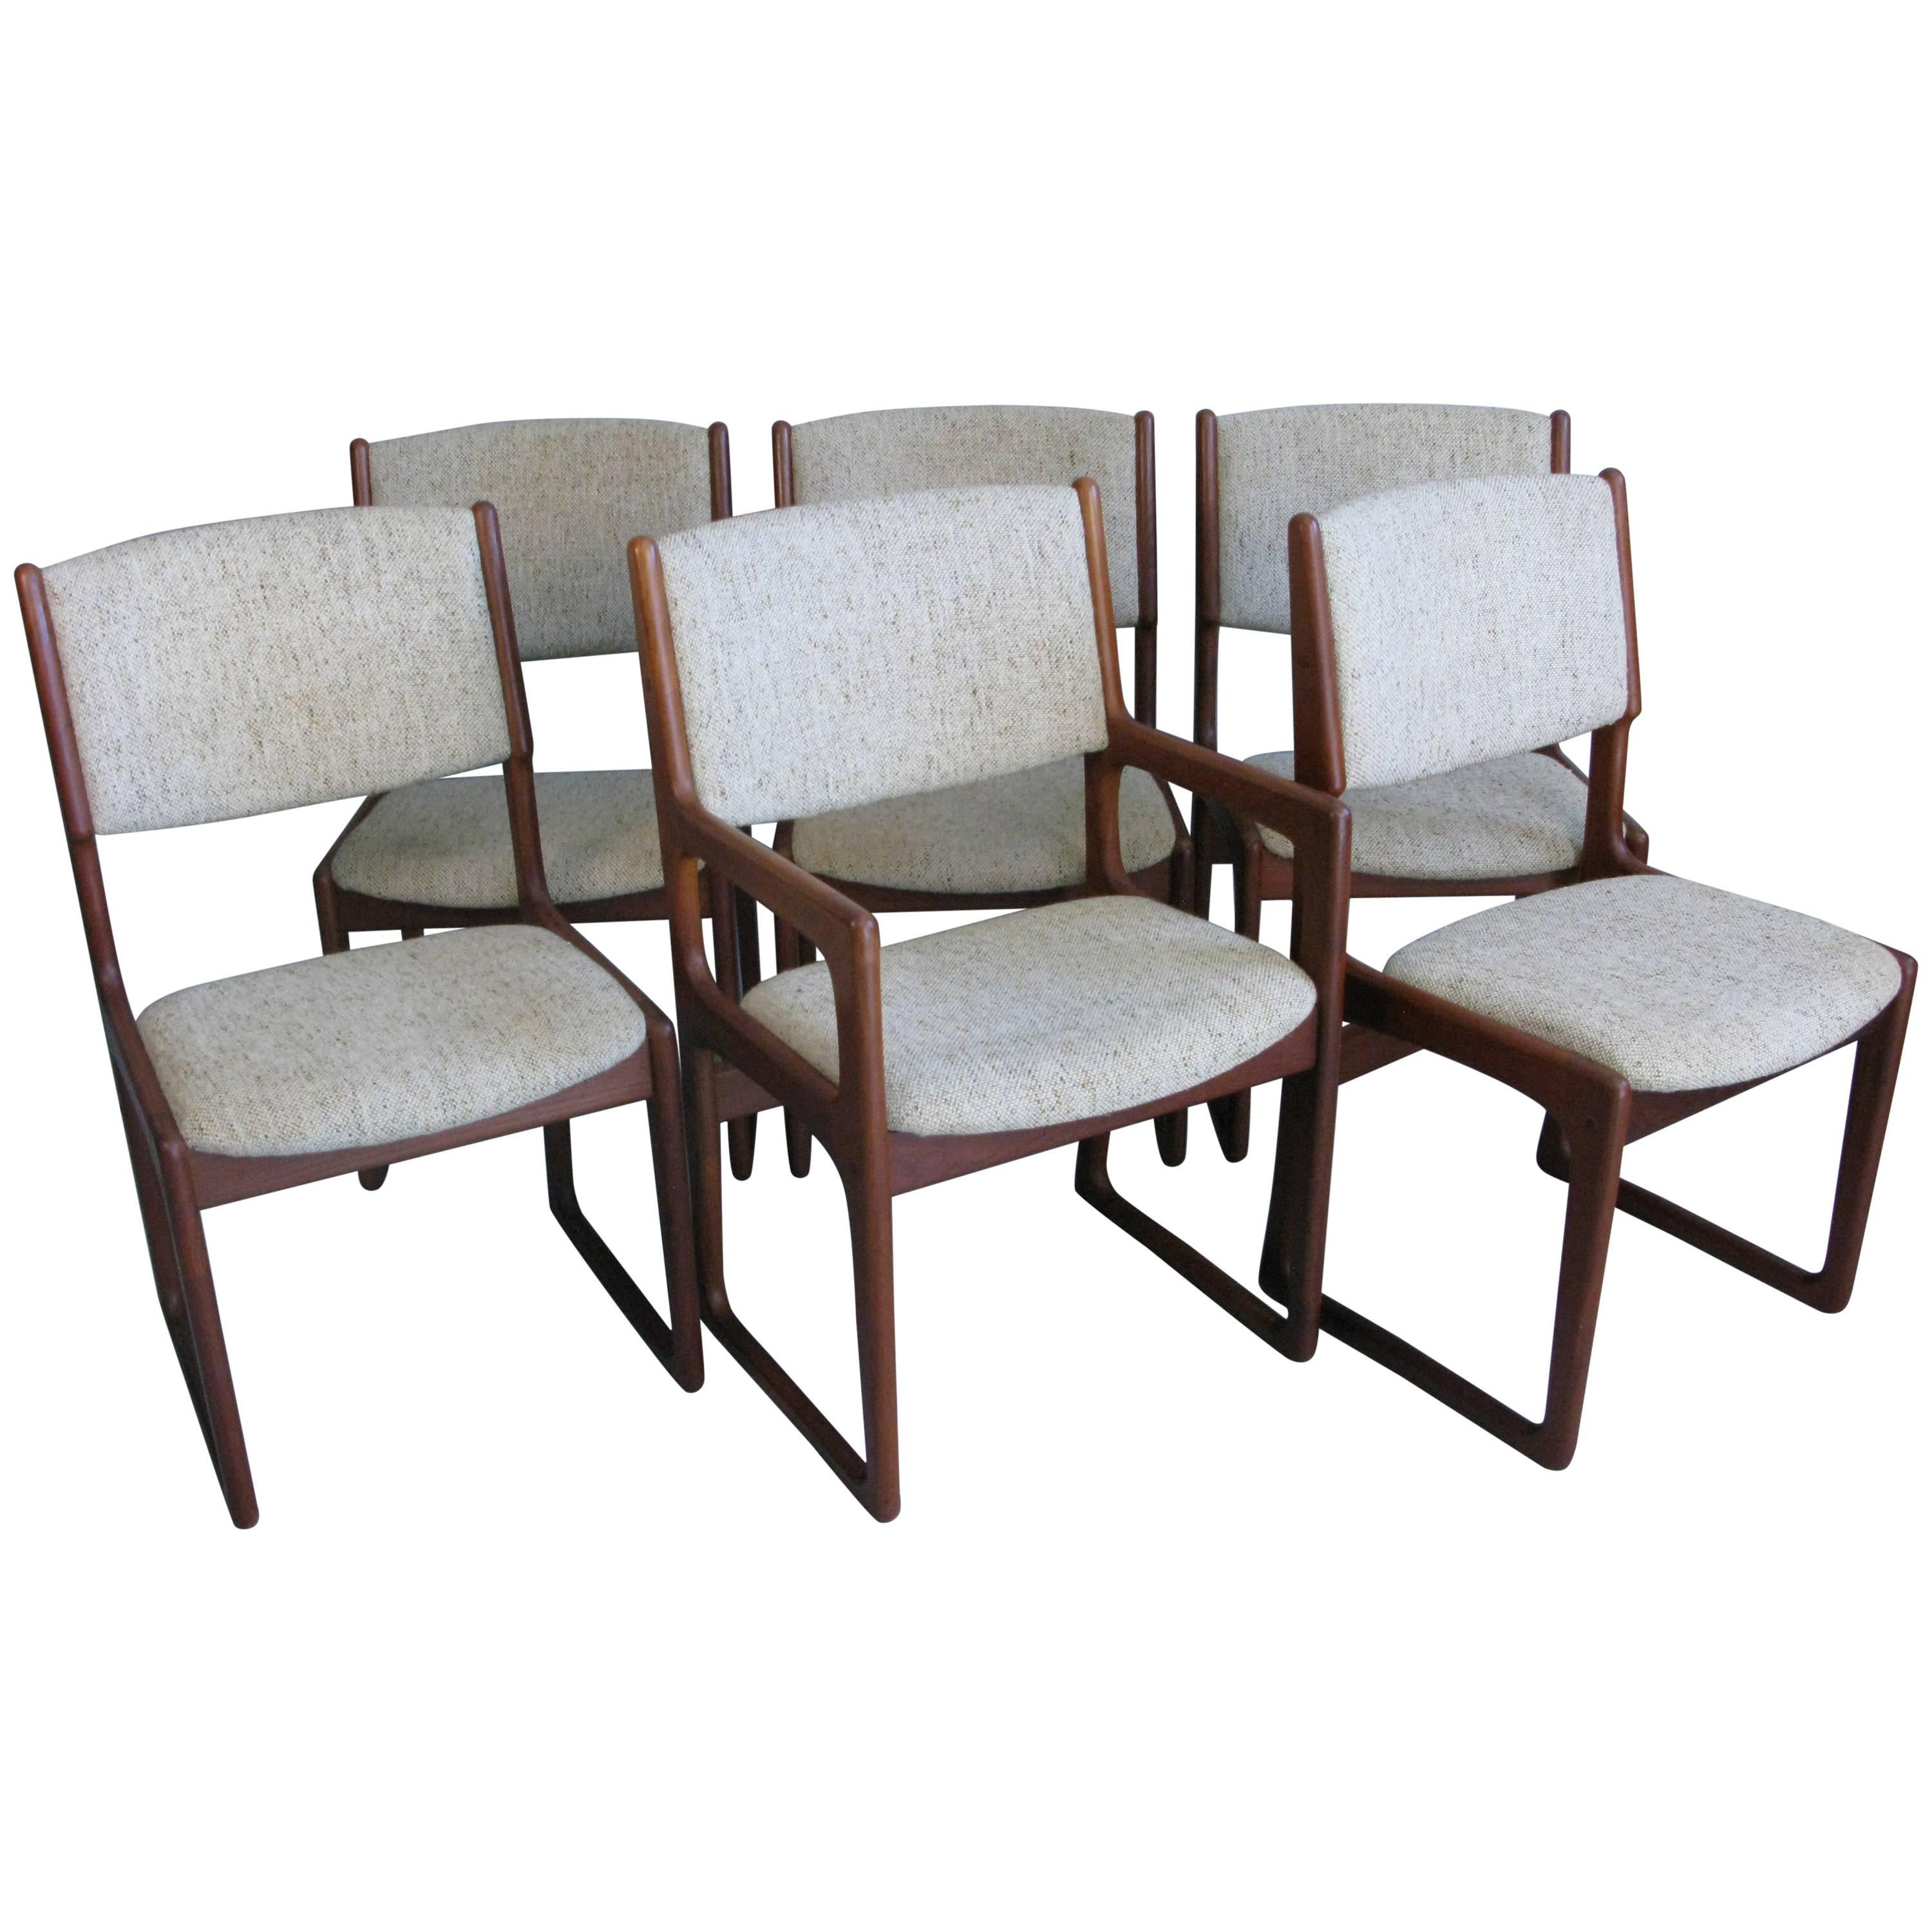 Set of Six 1960s Danish Design Chairs by Benny Linden